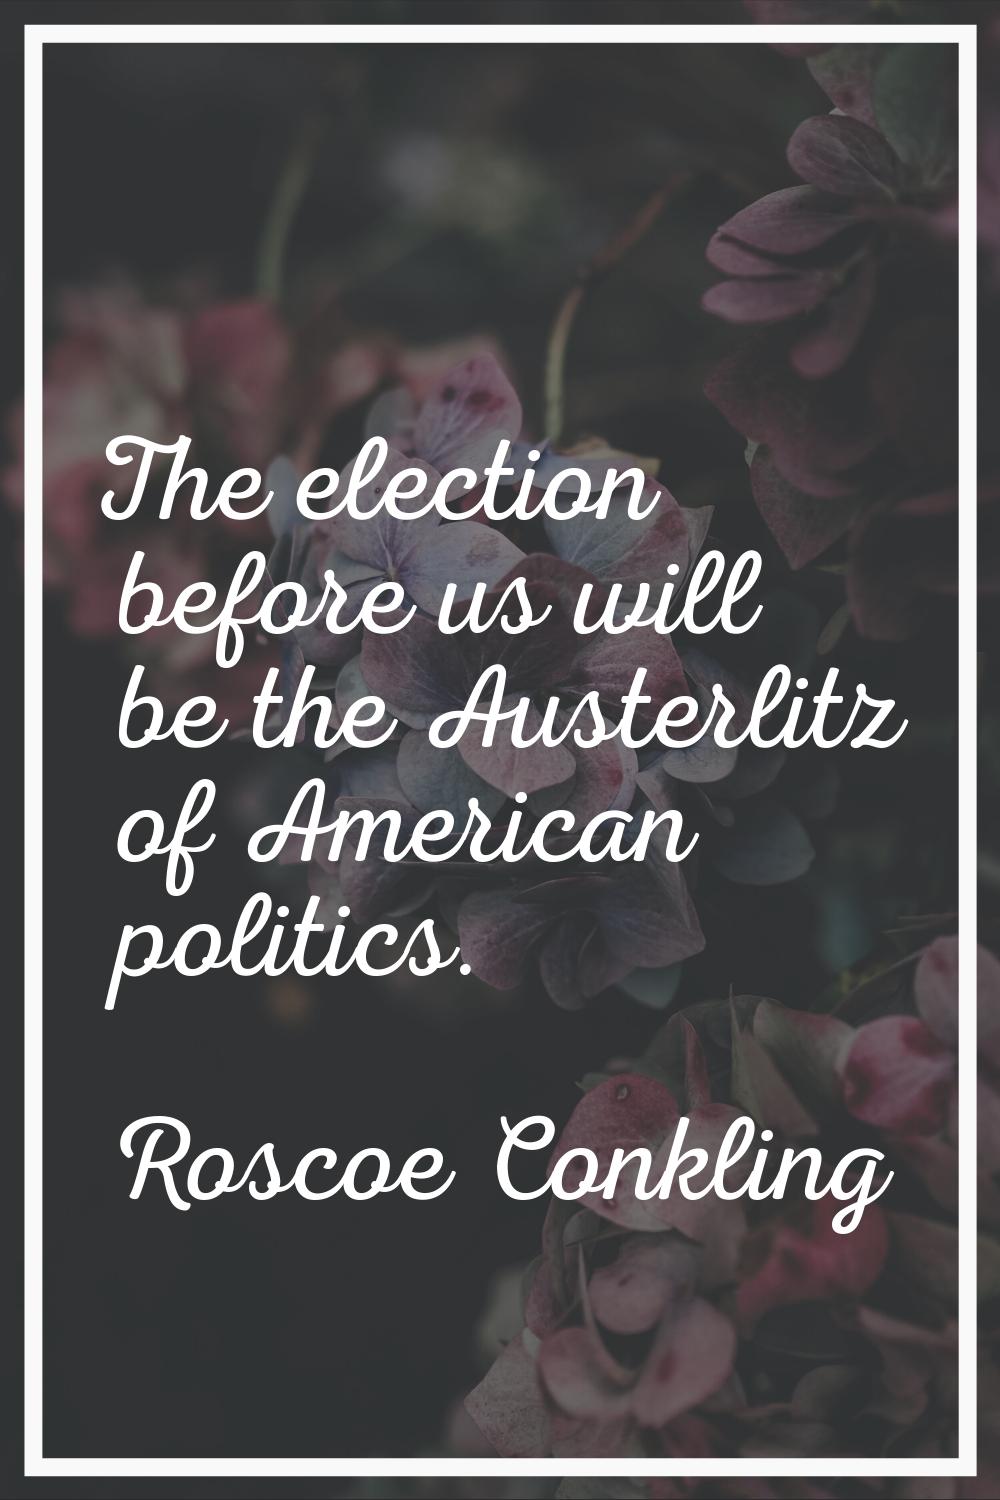 The election before us will be the Austerlitz of American politics.